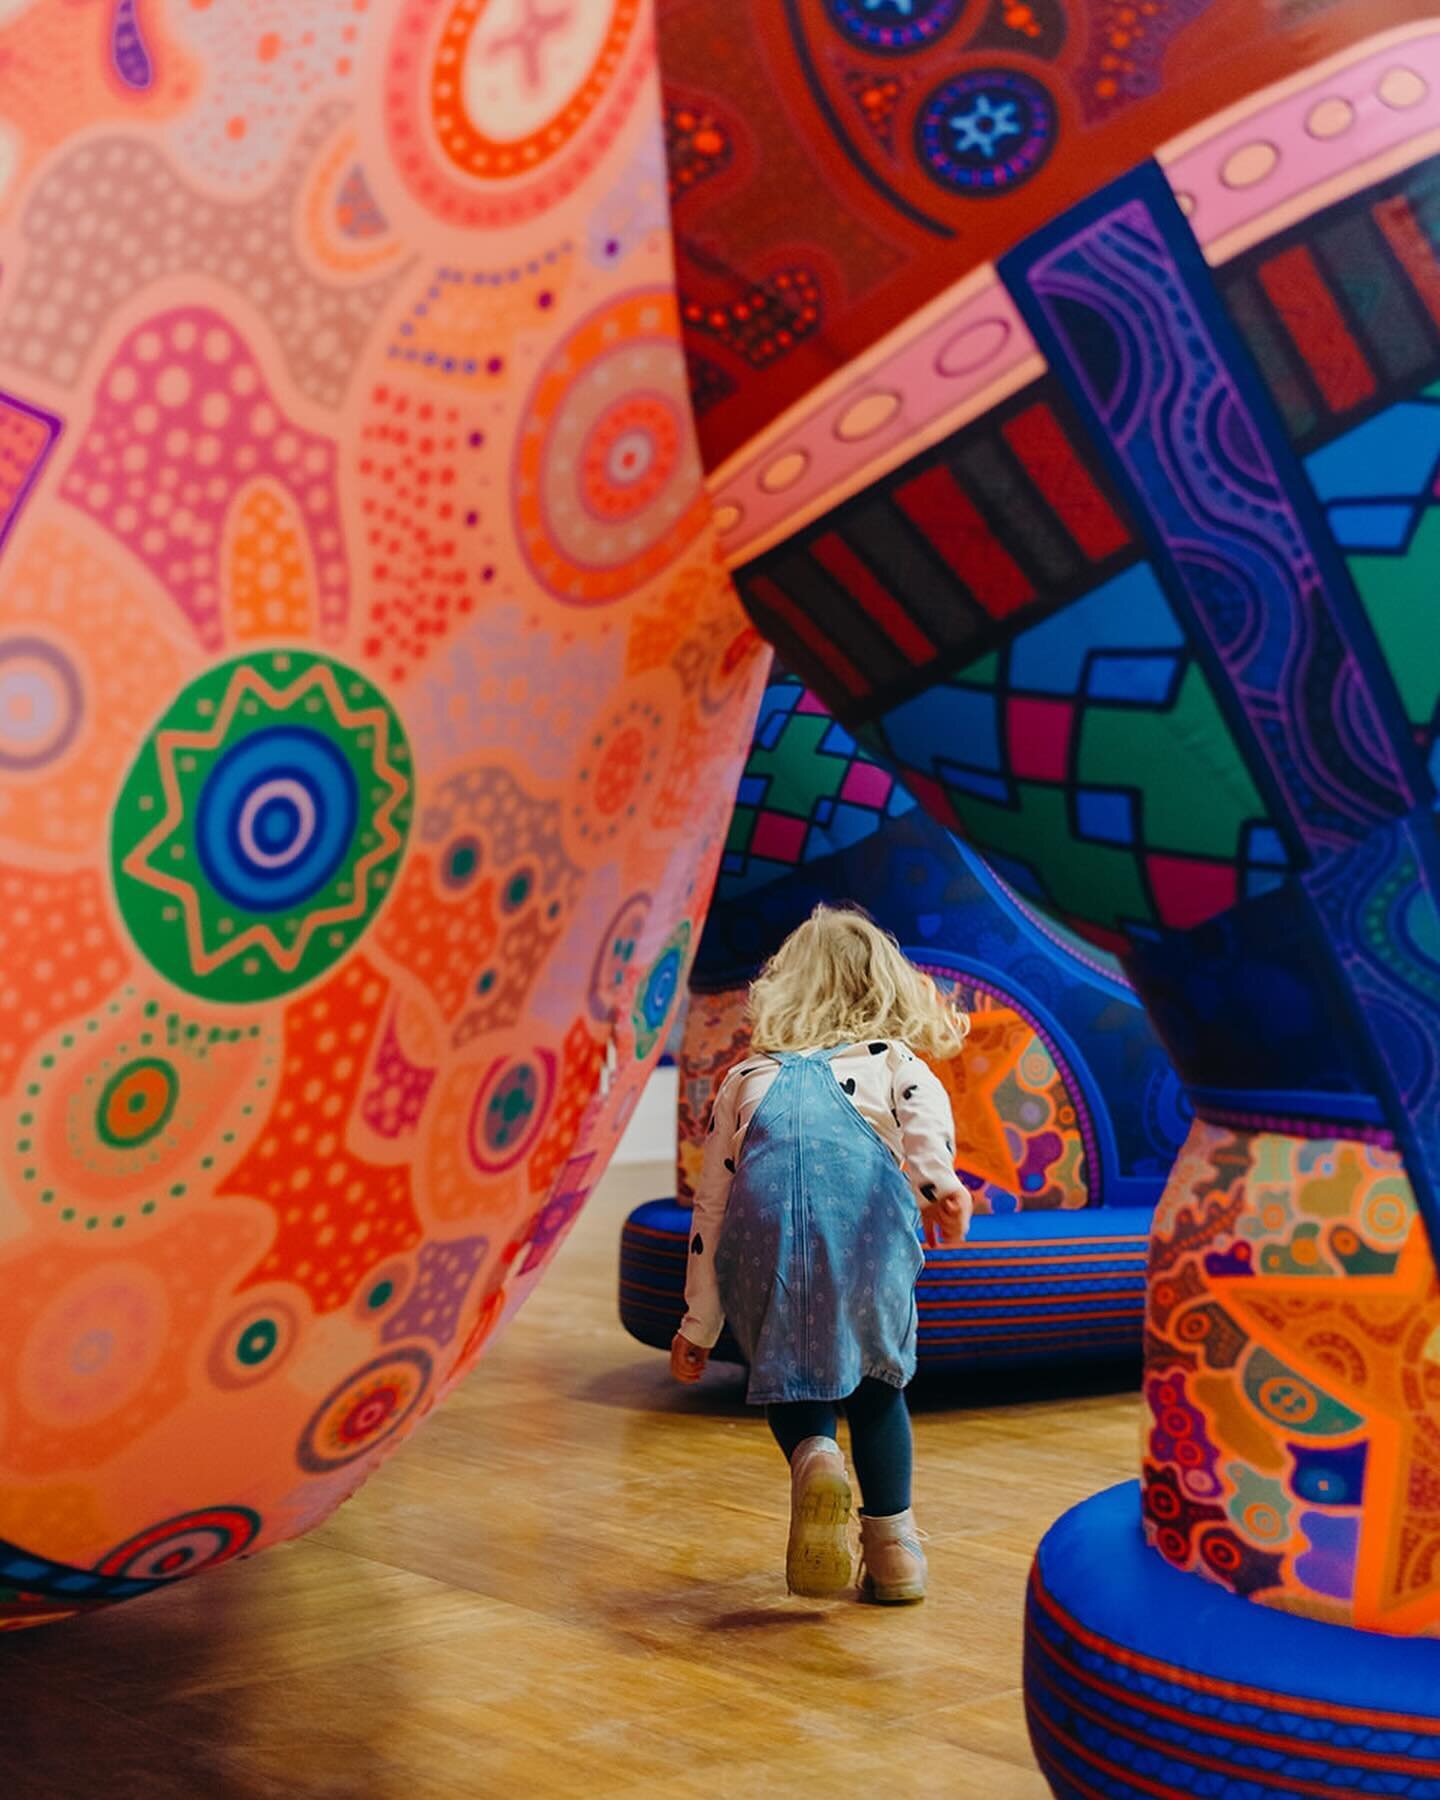 This week I fancied doing something a little different with my little ones, after a quick search I came across some amazingly colourful images from the new exhibition at @lincsmuseumusher - a place we hang out a lot&hellip;

Jason and his argonauts o